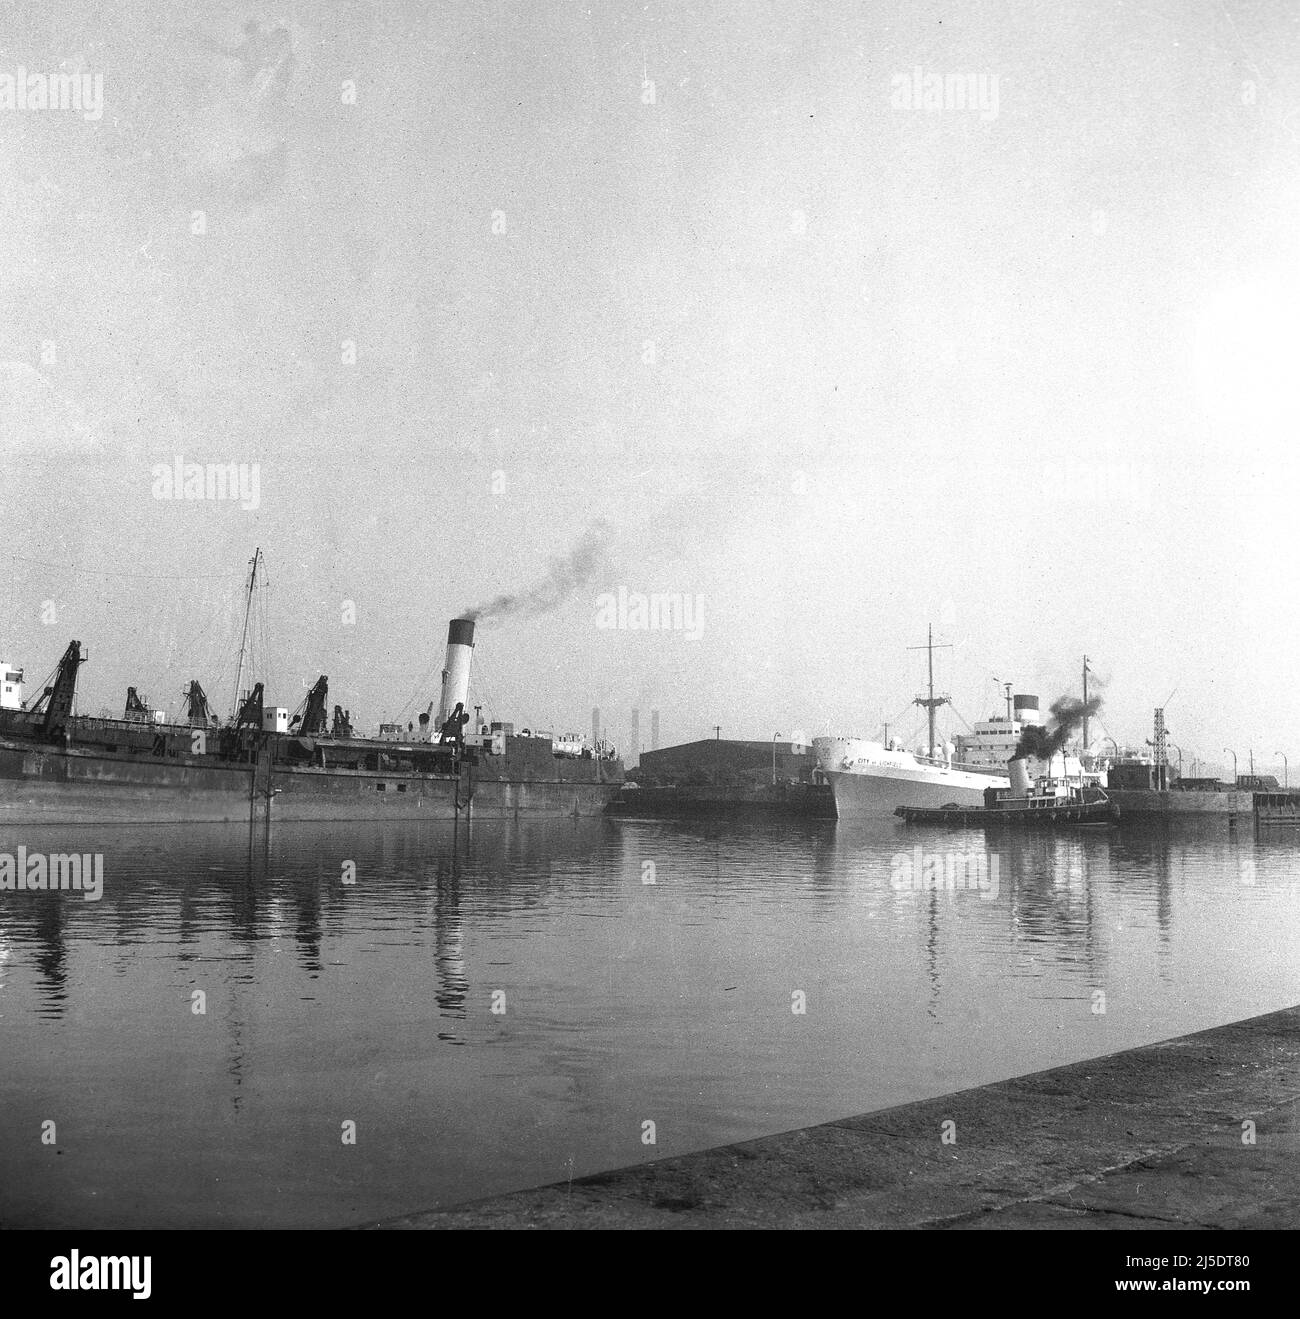 1961, historical, steam powered barges and cargo ships docked at Birkenhead, Liverpool, including the  Steel motor vessel, City of Lichfield, built by William Denny & Bros on the Clyde in Scotland. The Birkenhead docks were an inland waterway on the River Mersey, which closed in 1993. Stock Photo